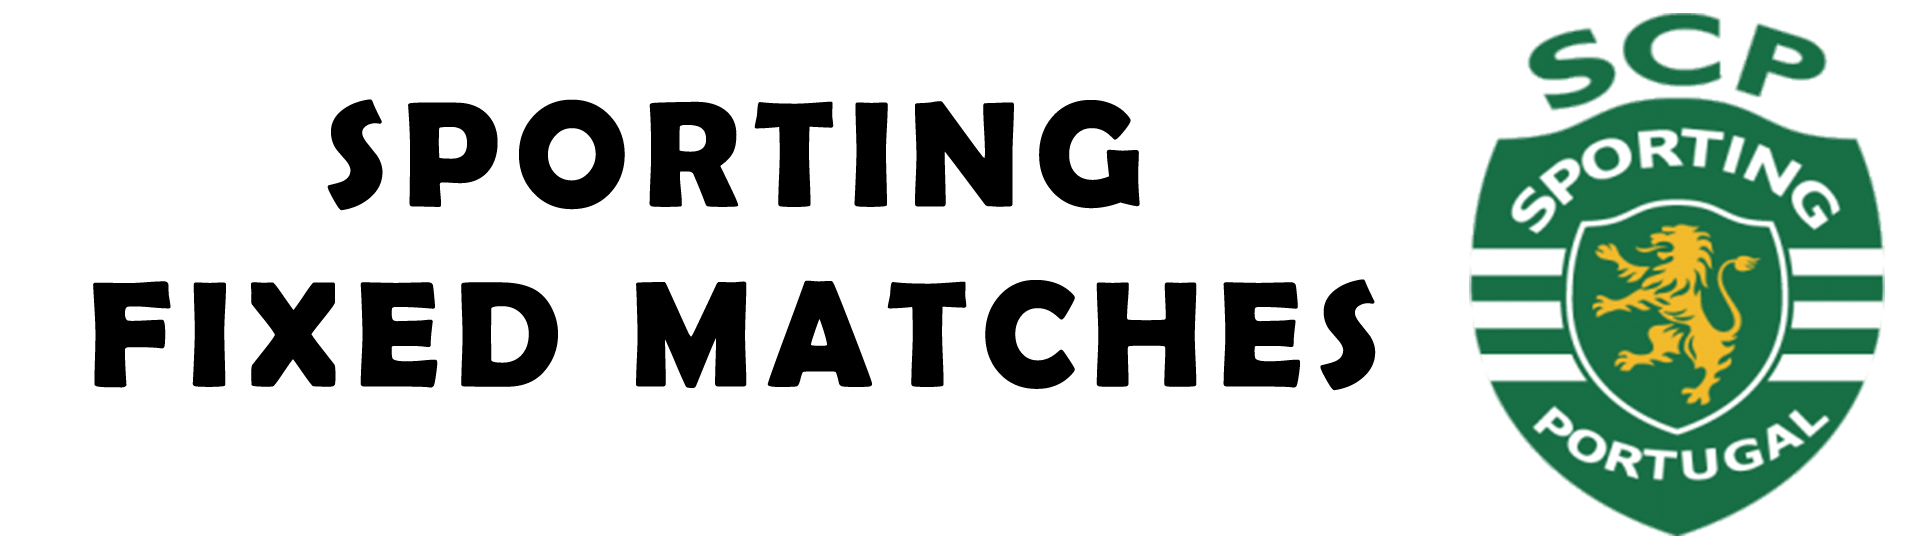 sporting fixed matches